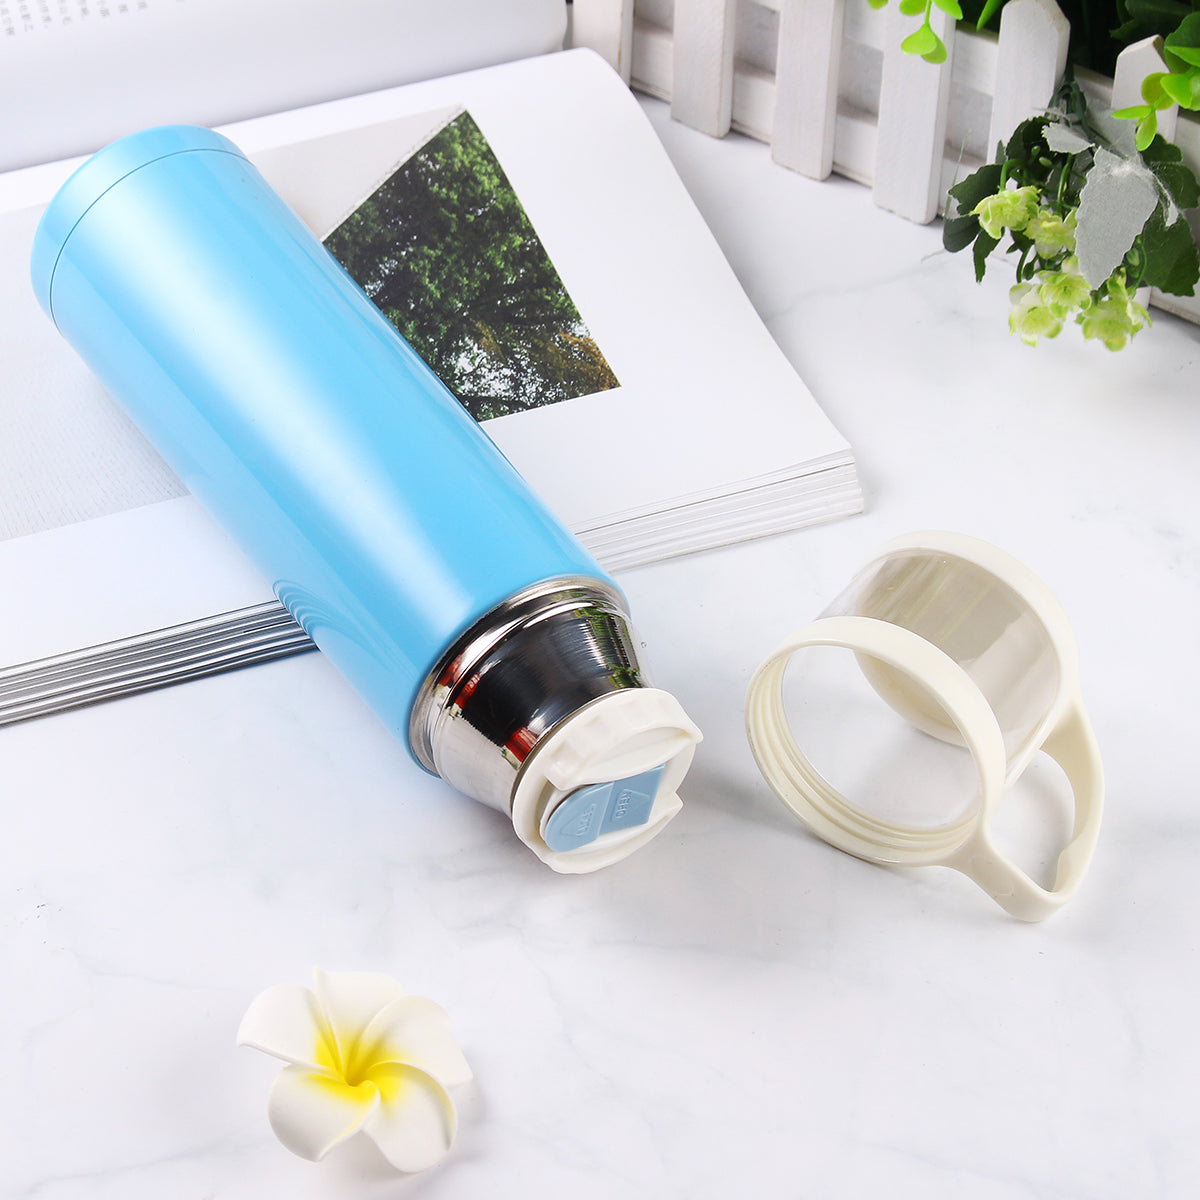 BIKIGHT 500ml 304 Stainless Steel Water Bottle Insulation Cup Thermal Cup Camping Riding Hunting